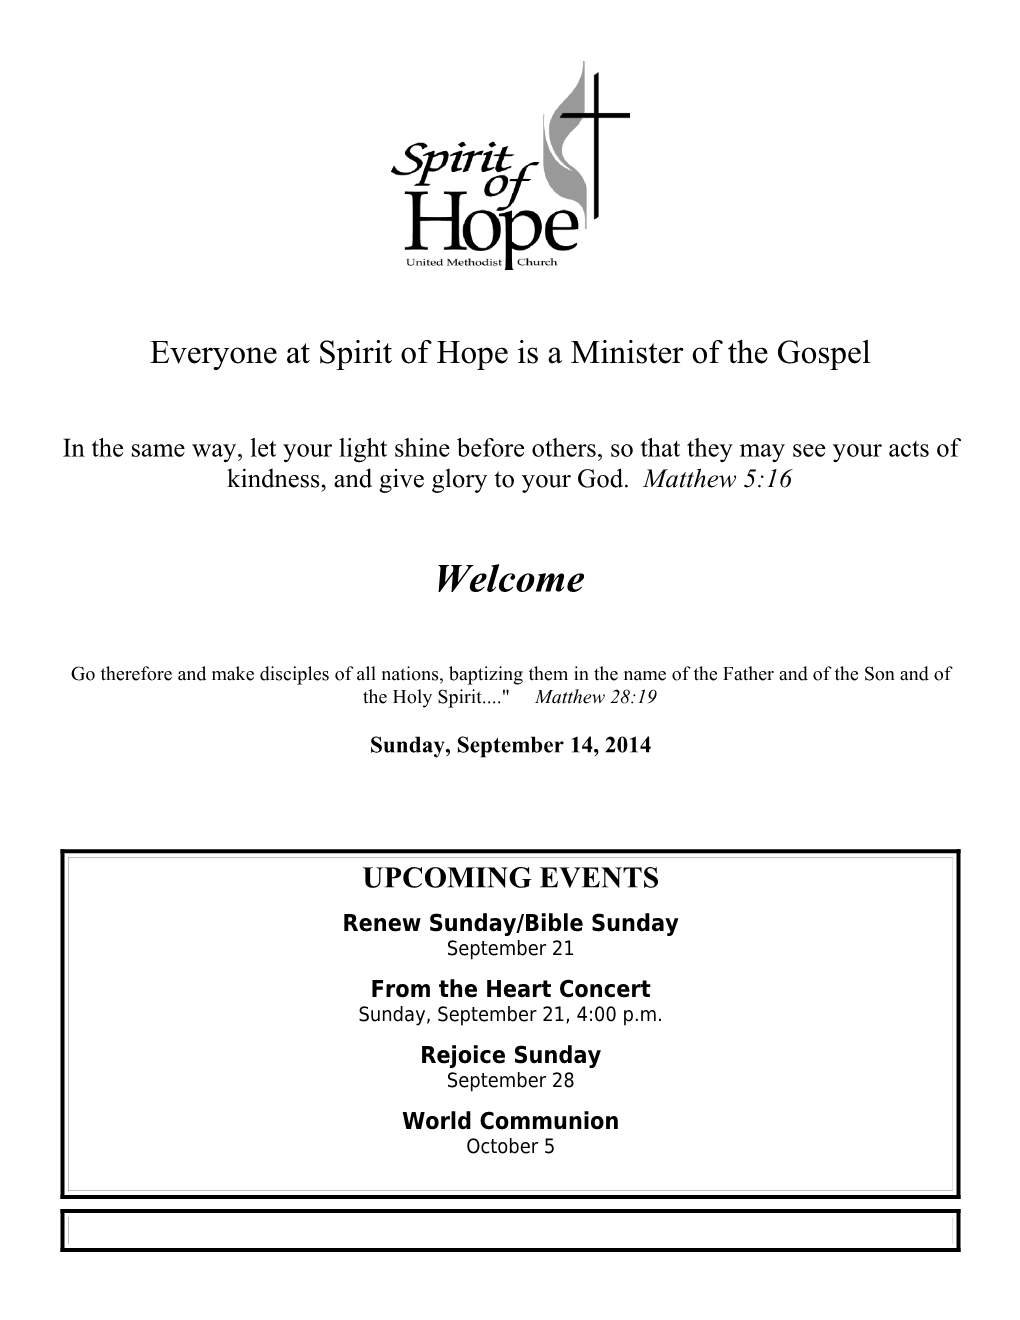 Everyone at Spirit of Hopeis a Minister of the Gospel